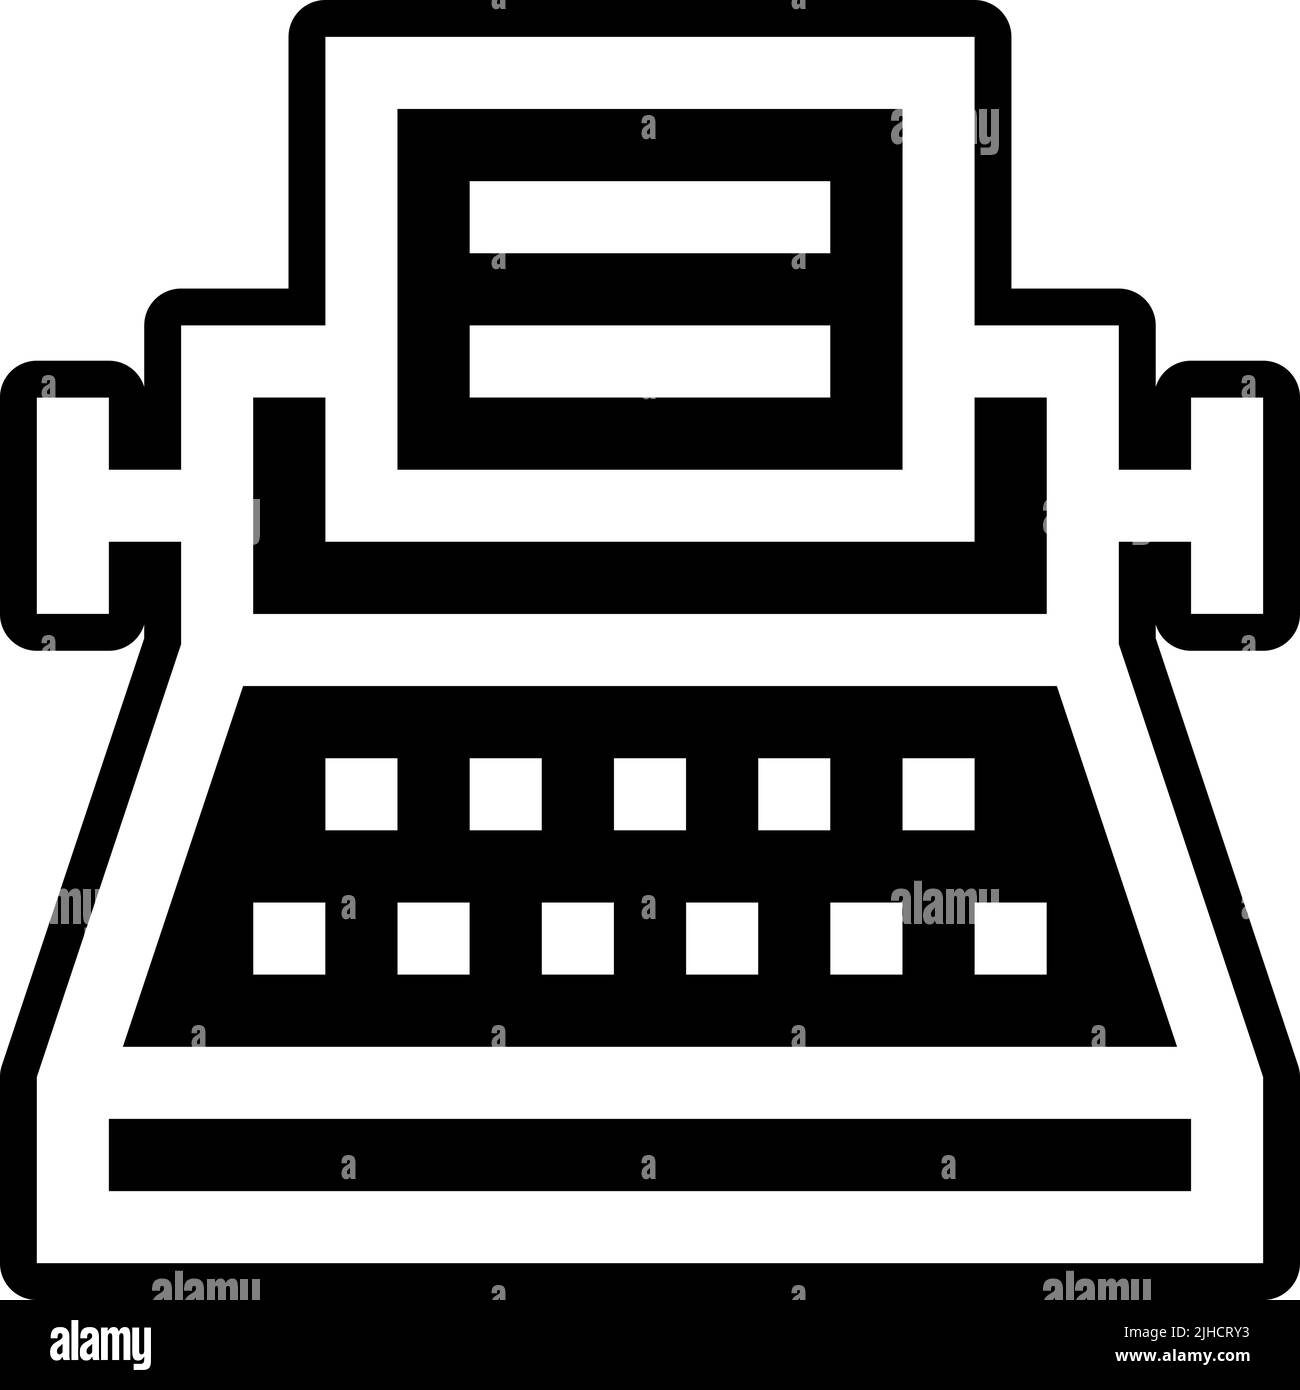 Contacts and communication typewriter . Stock Vector